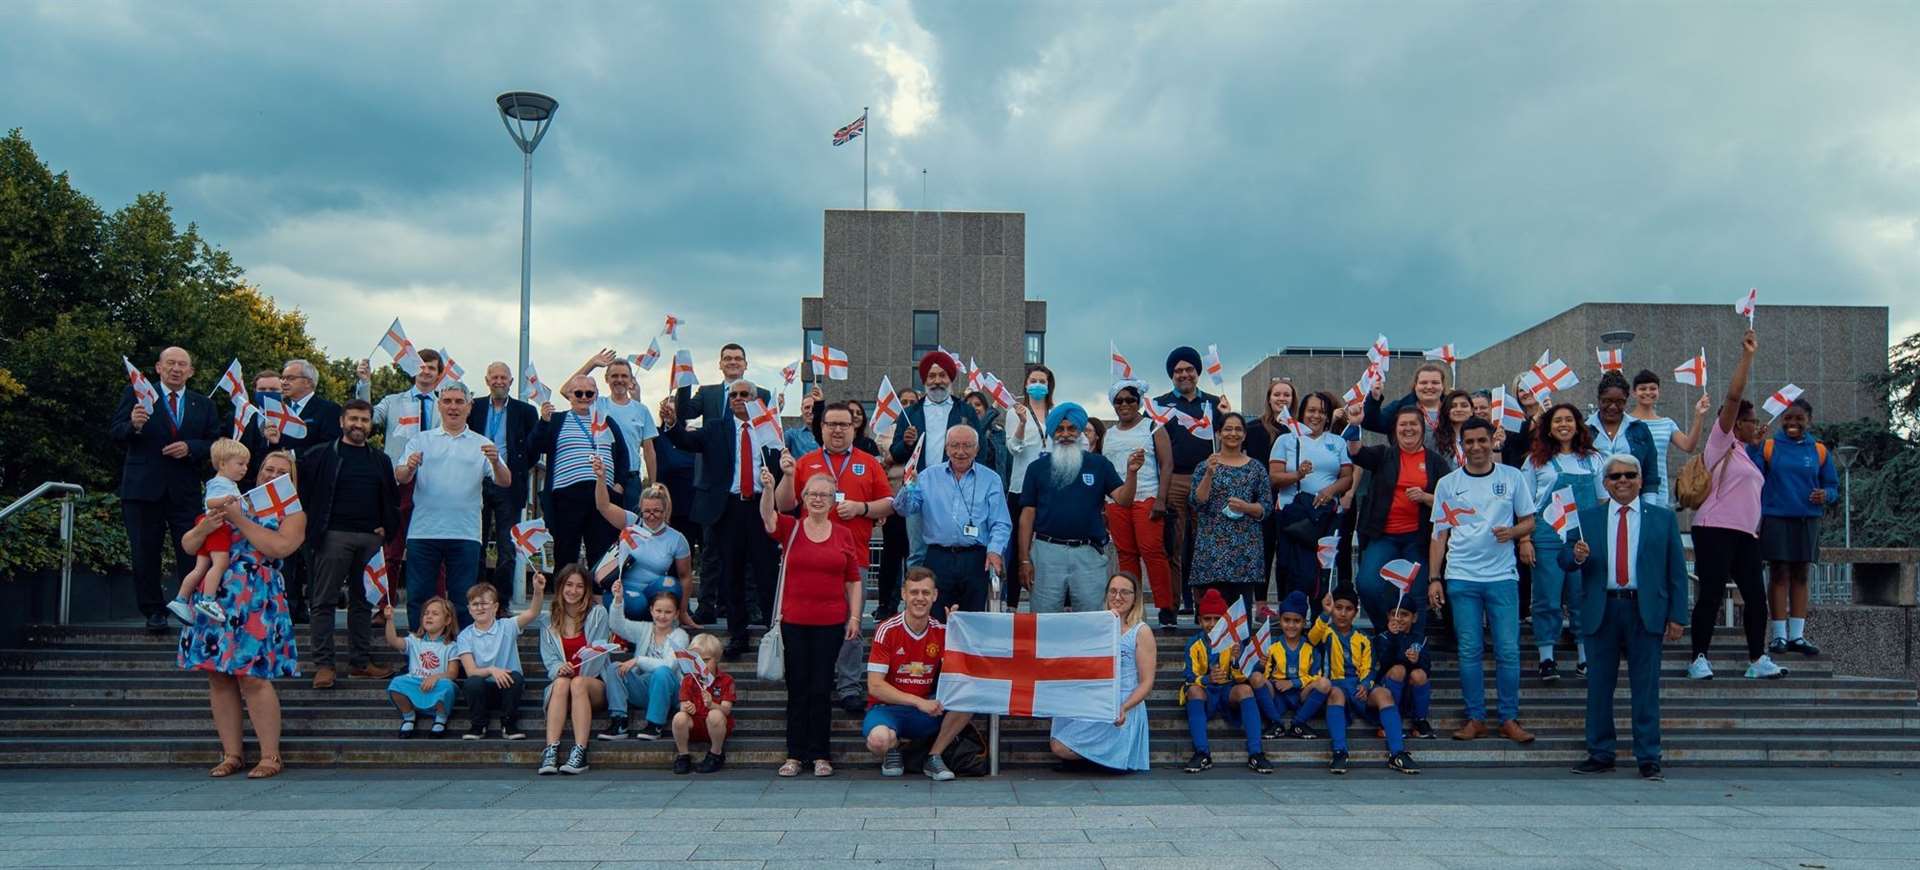 People joined Gravesham council and CohesionPlusEvents on Community Square, Gravesend, on July 13 to show Gravesham stands united against racism in all its forms and in support of the England players who were subjected to racist abuse. Picture: Gravesham council